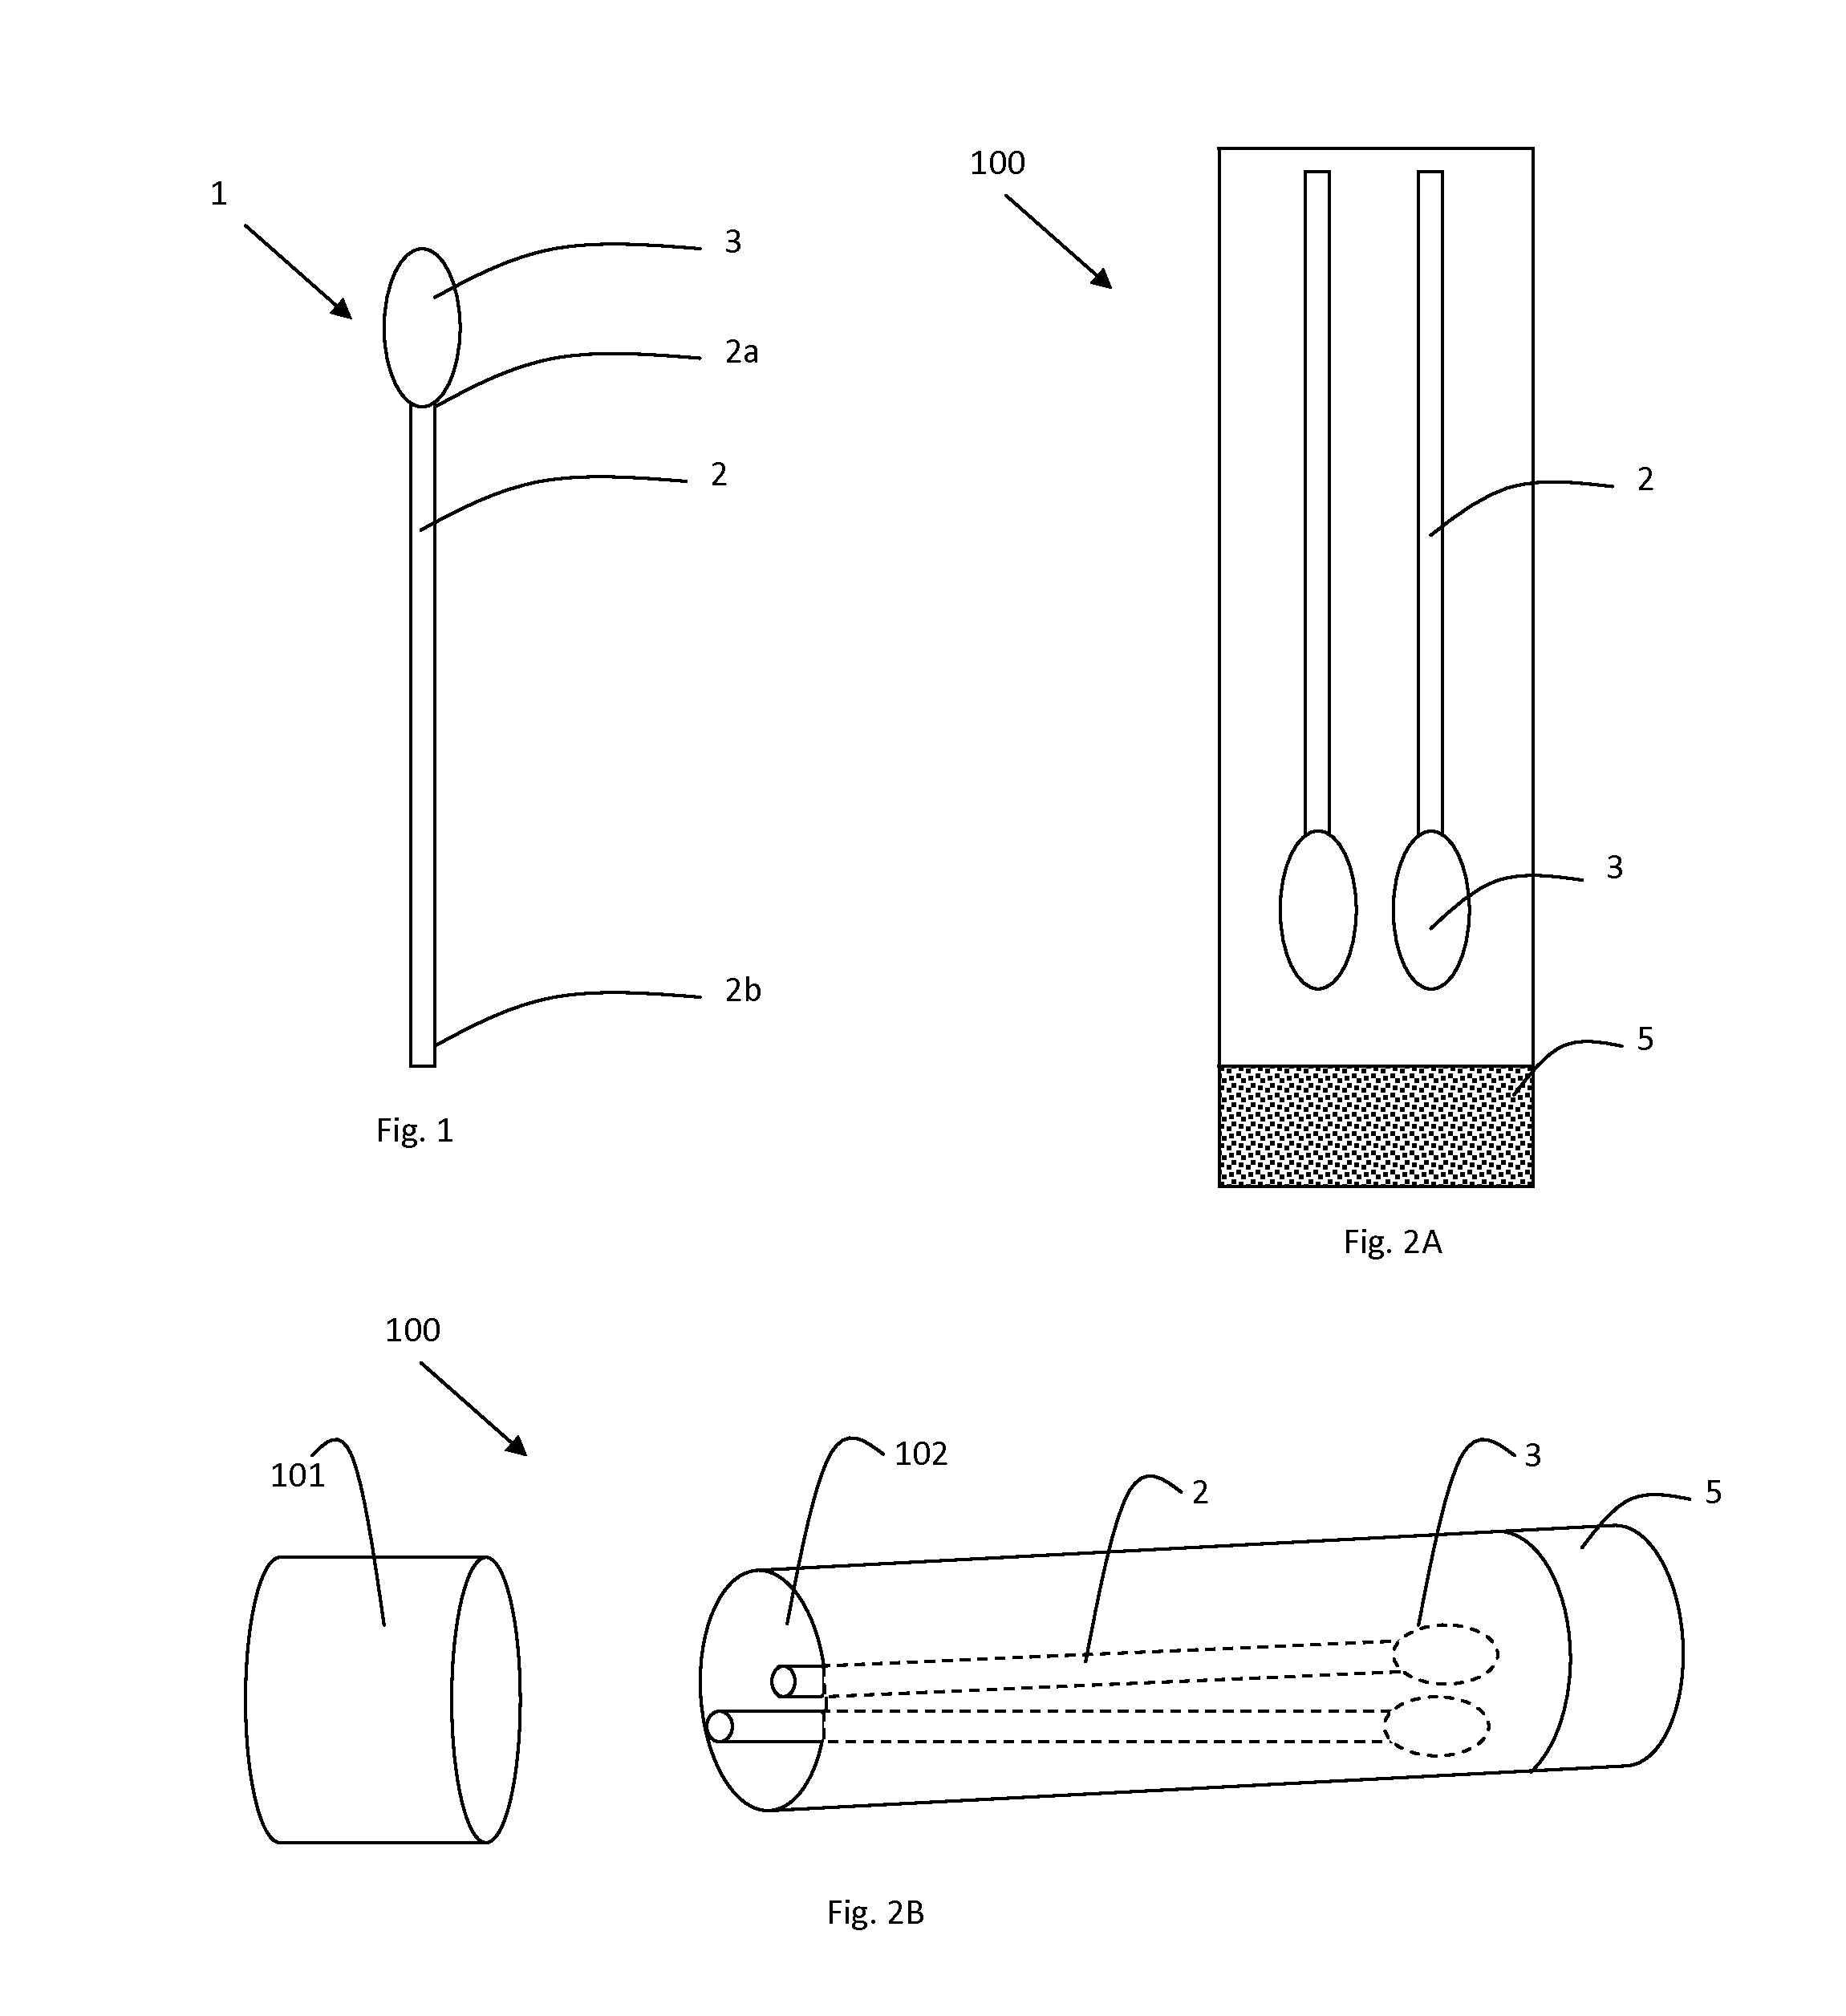 Method, composition and kit for treating frequent headaches